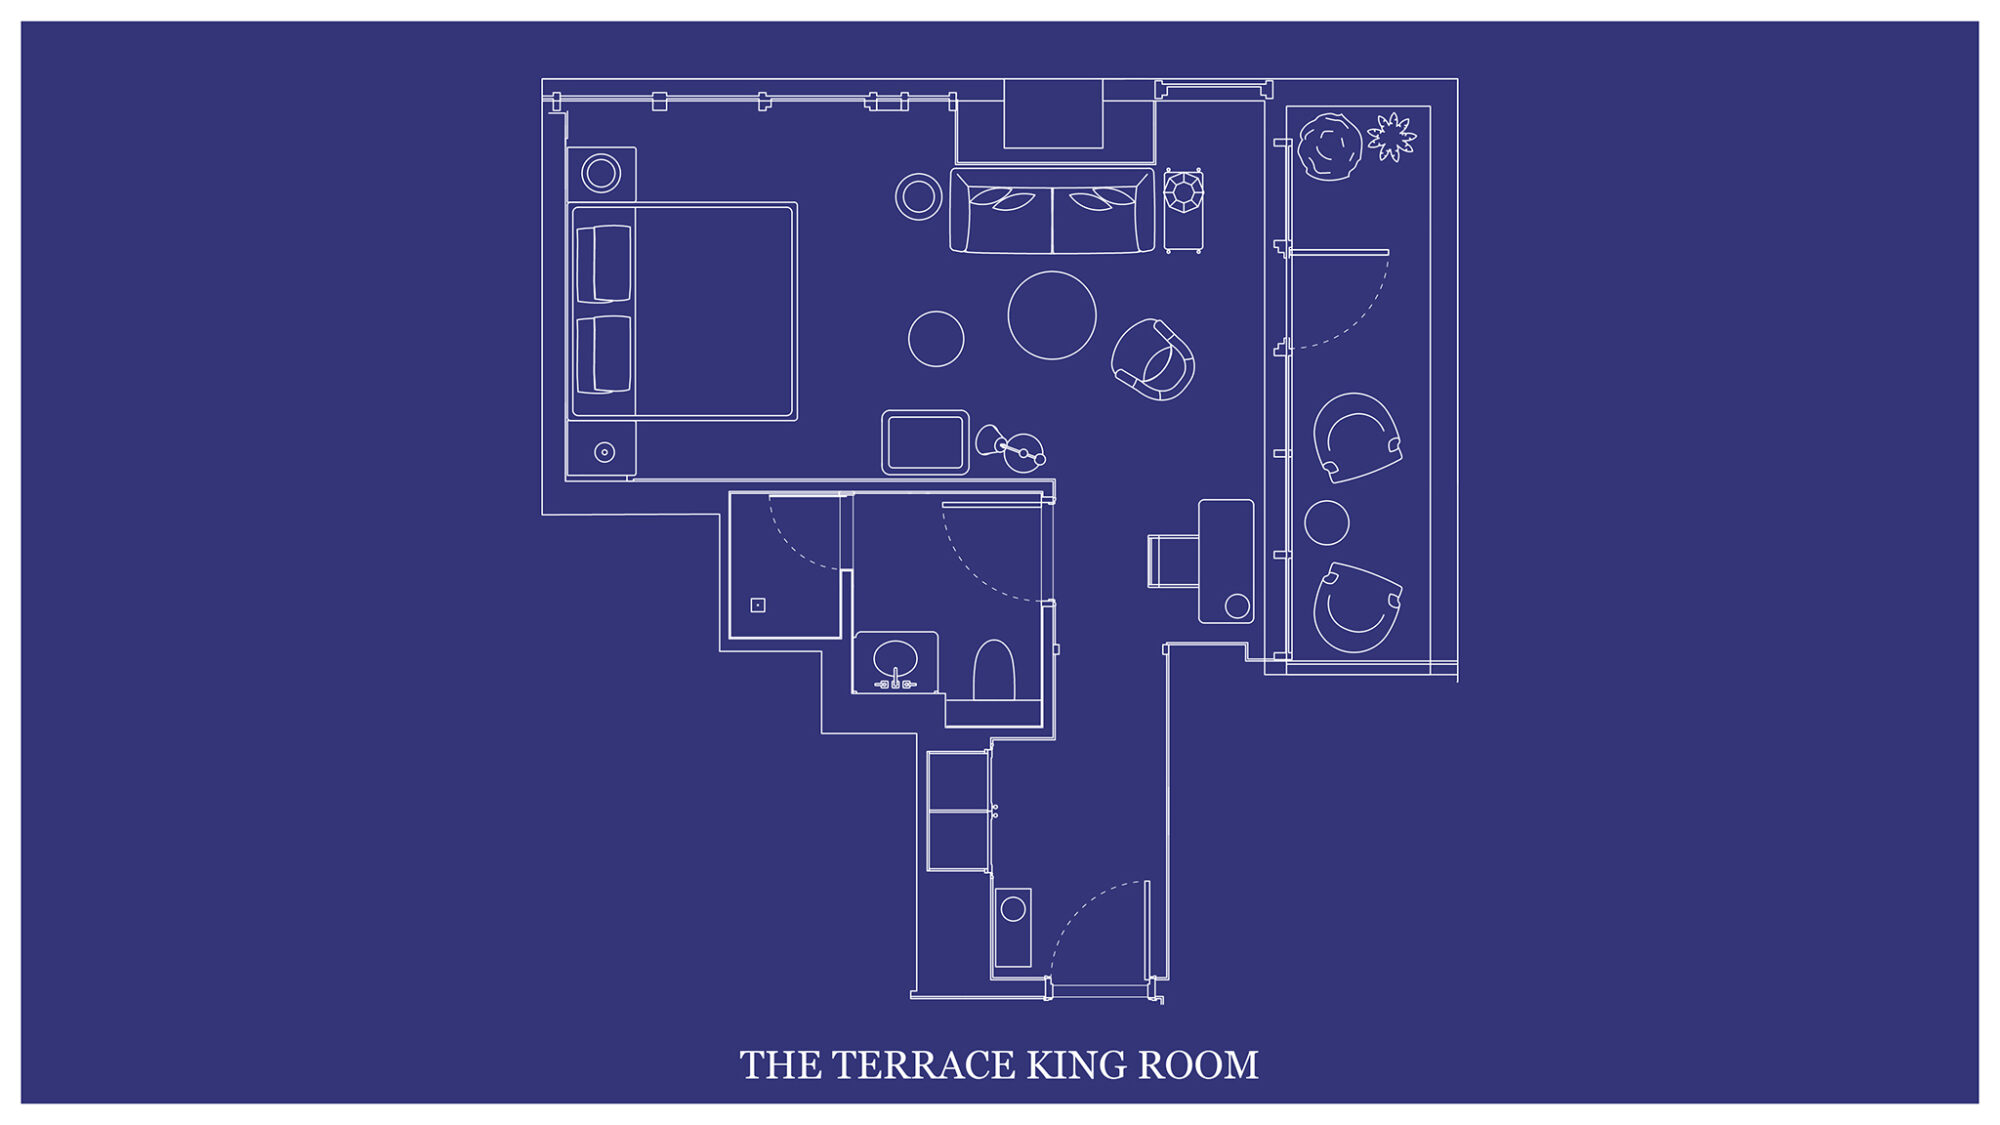 The architectural layout of "THE TERRACE KING ROOM" is depicted on a blueprint map.